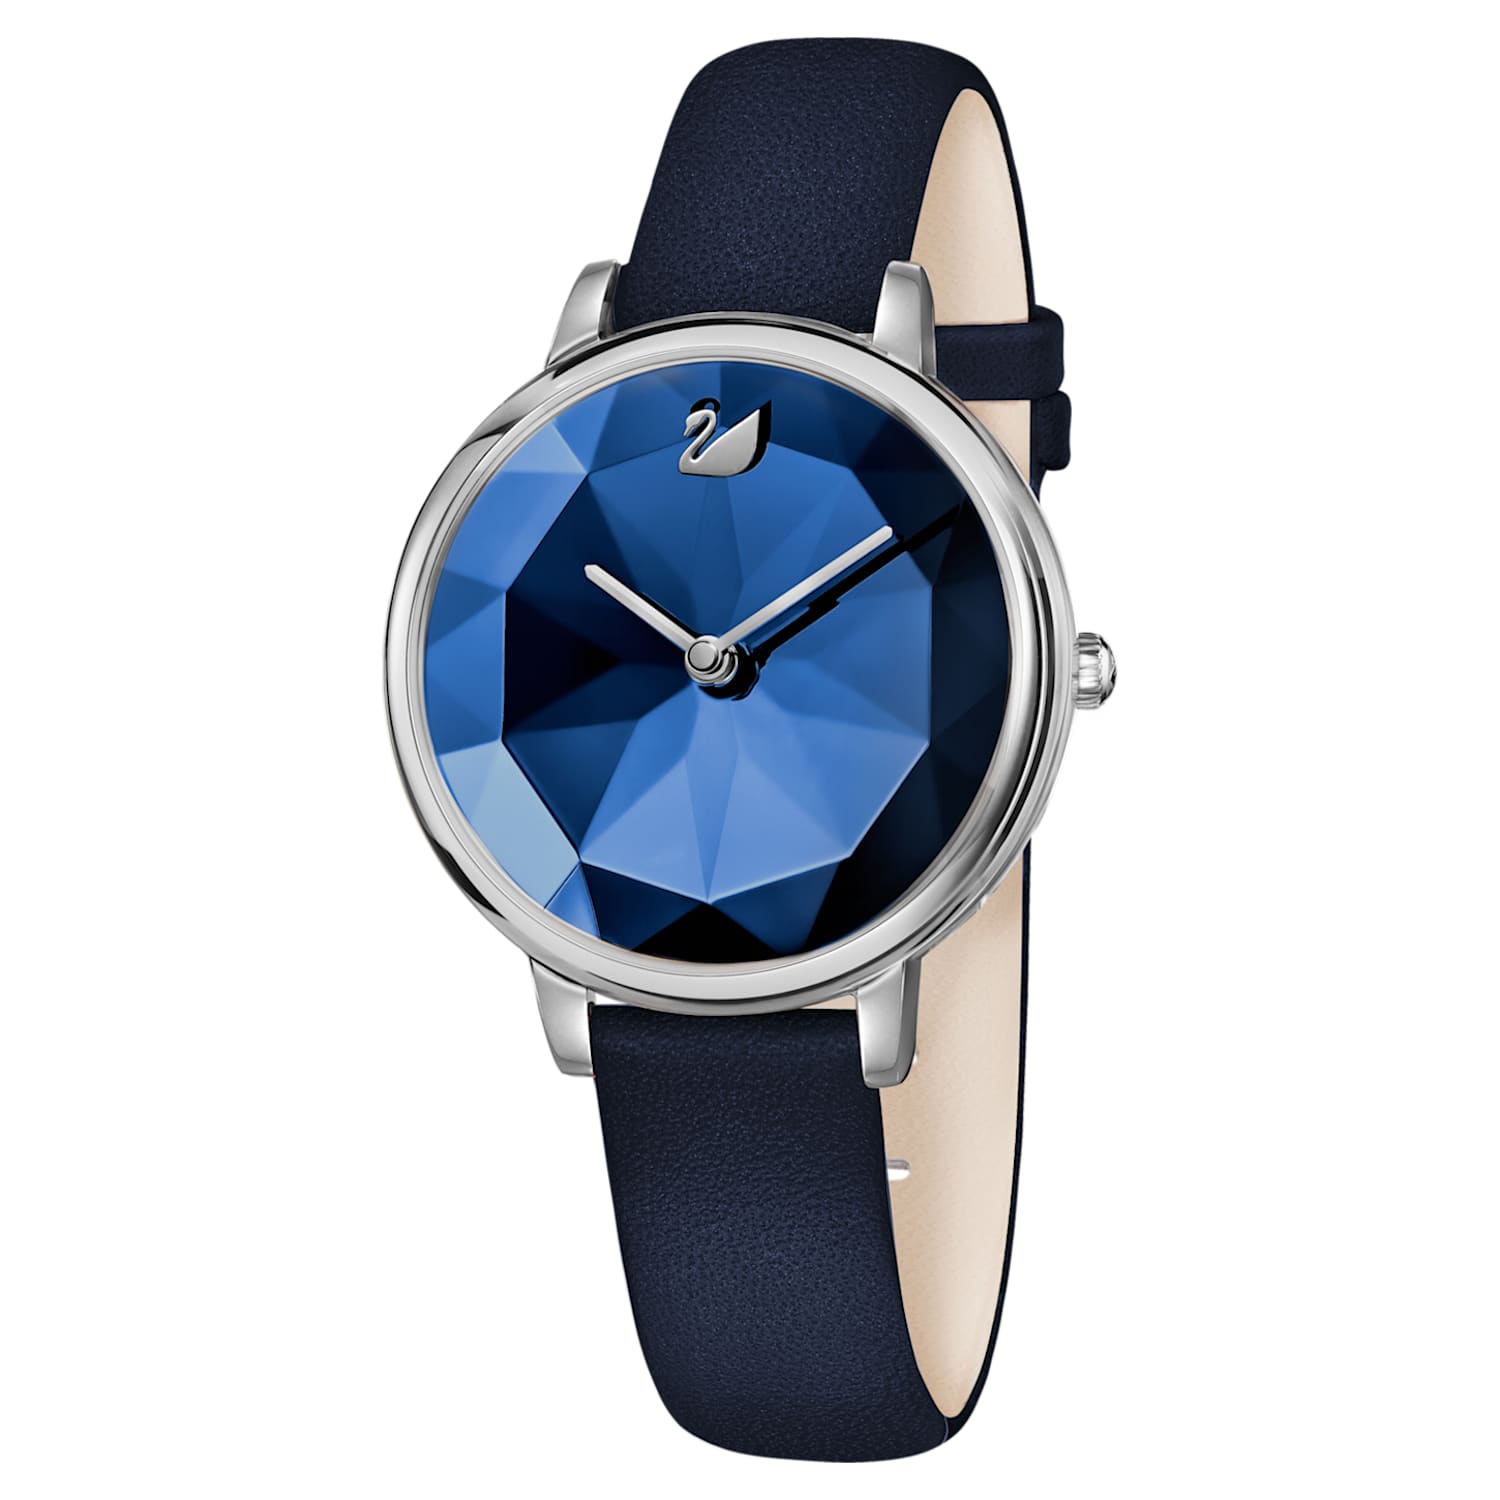 Crystal Lake Watch, Leather strap, Blue, Stainless steel